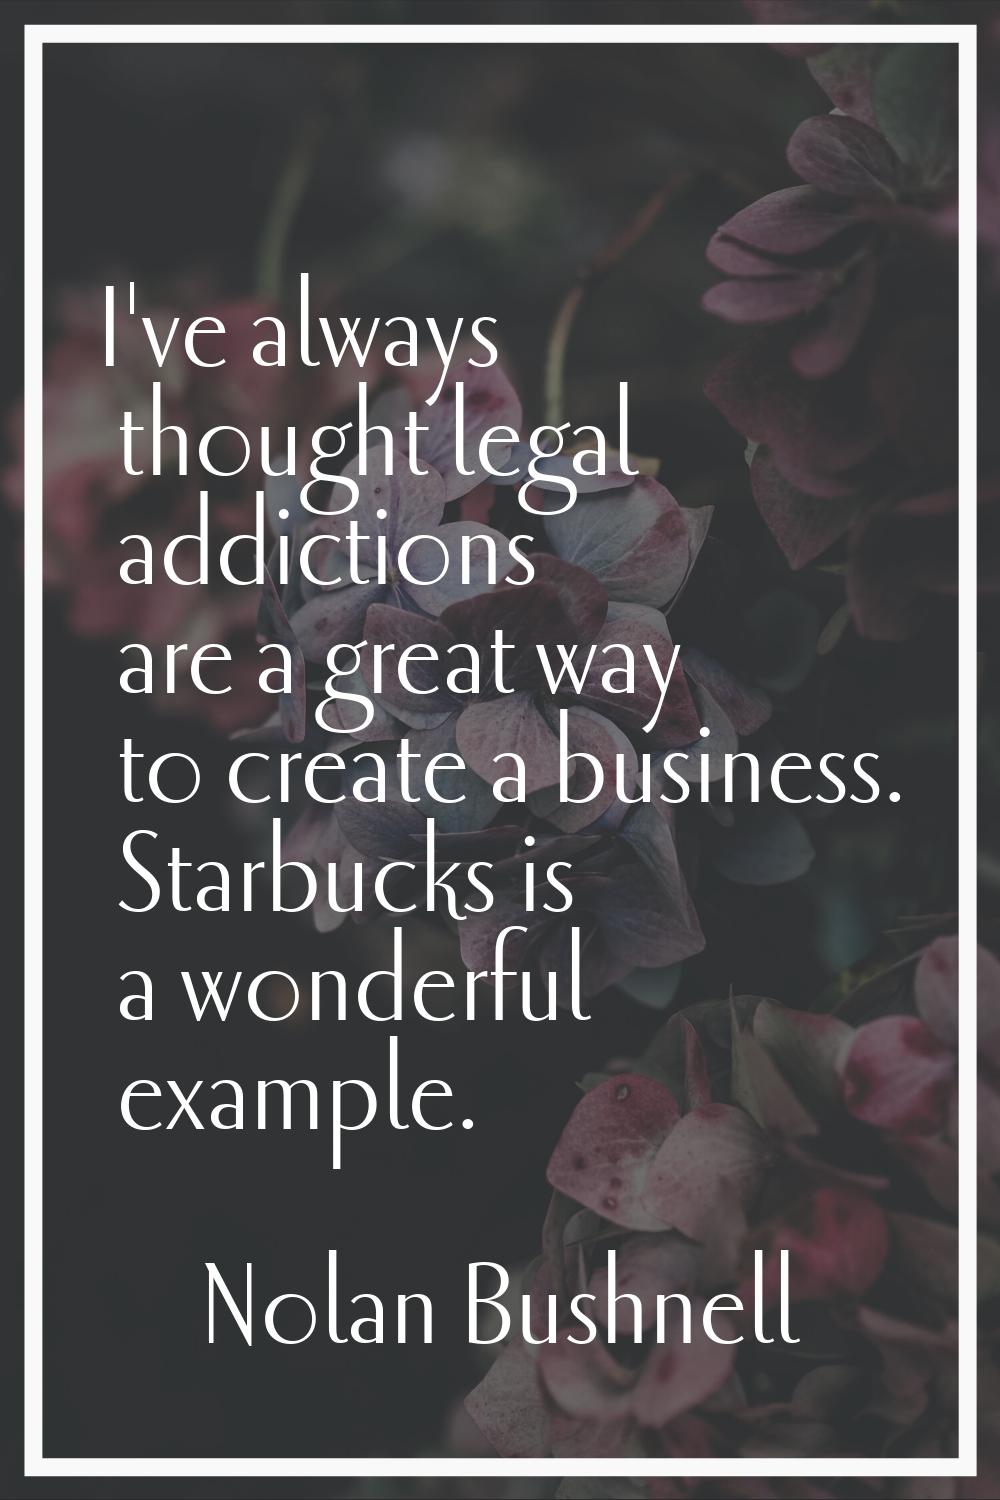 I've always thought legal addictions are a great way to create a business. Starbucks is a wonderful